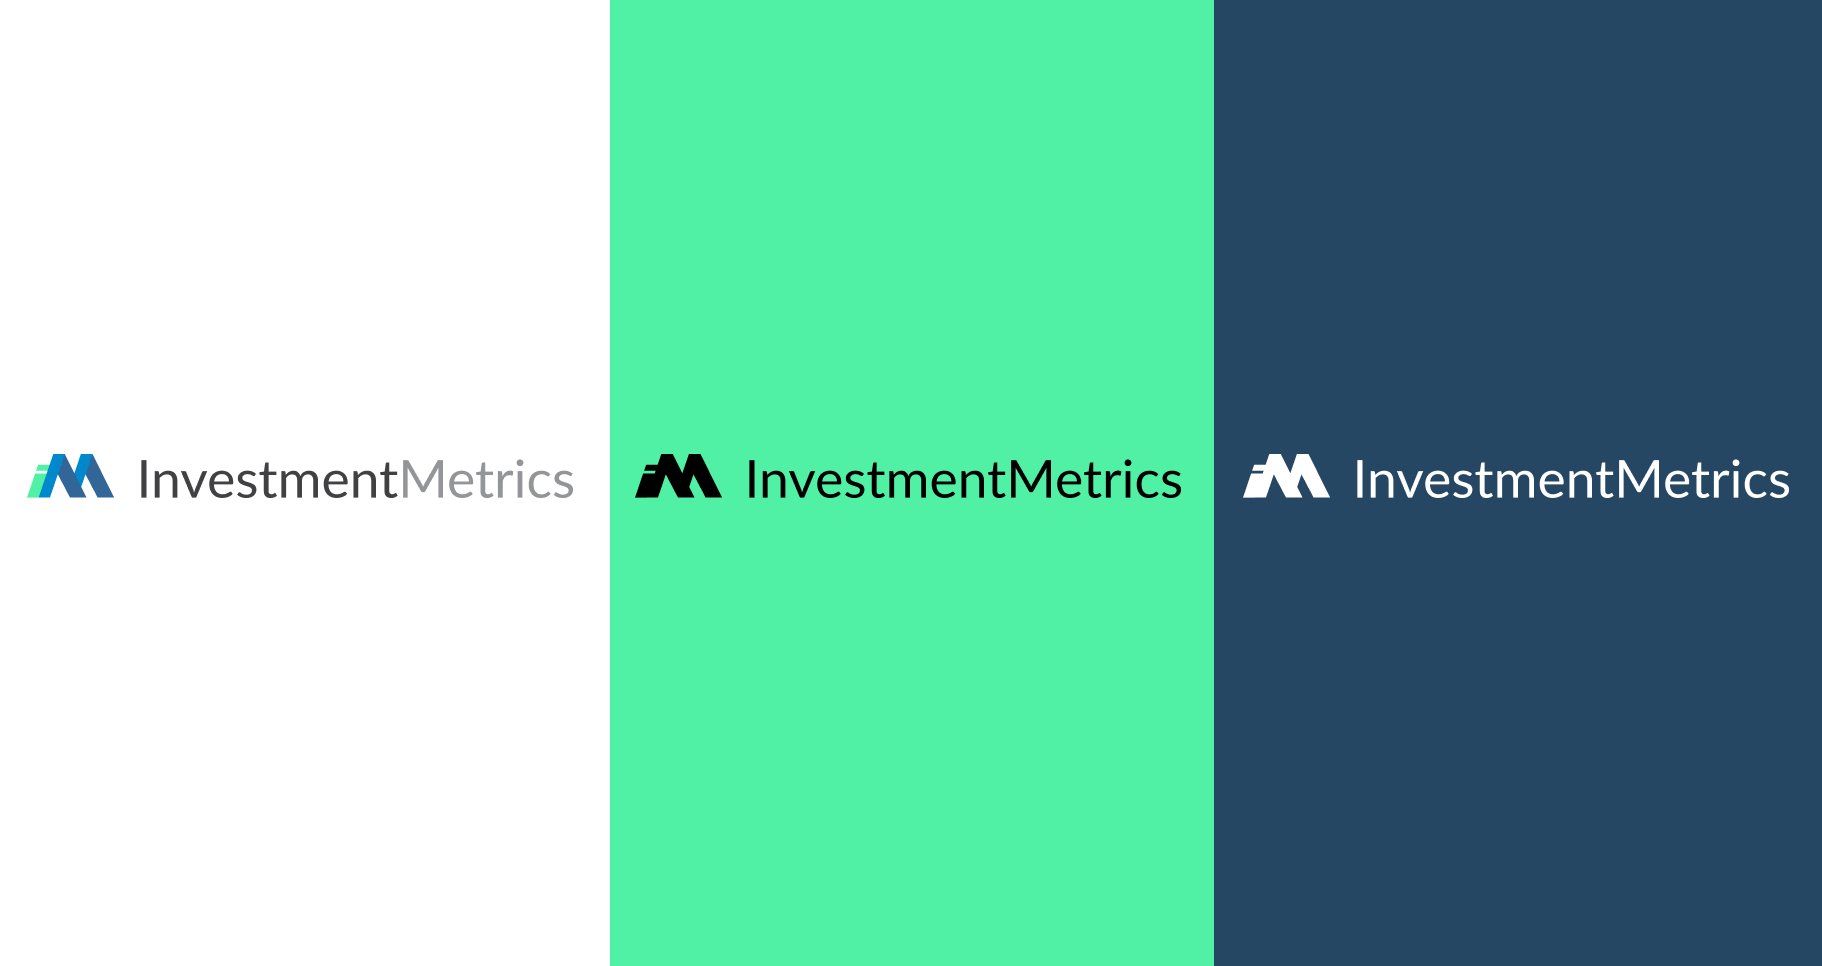 Investment Metrics logos with different background colors